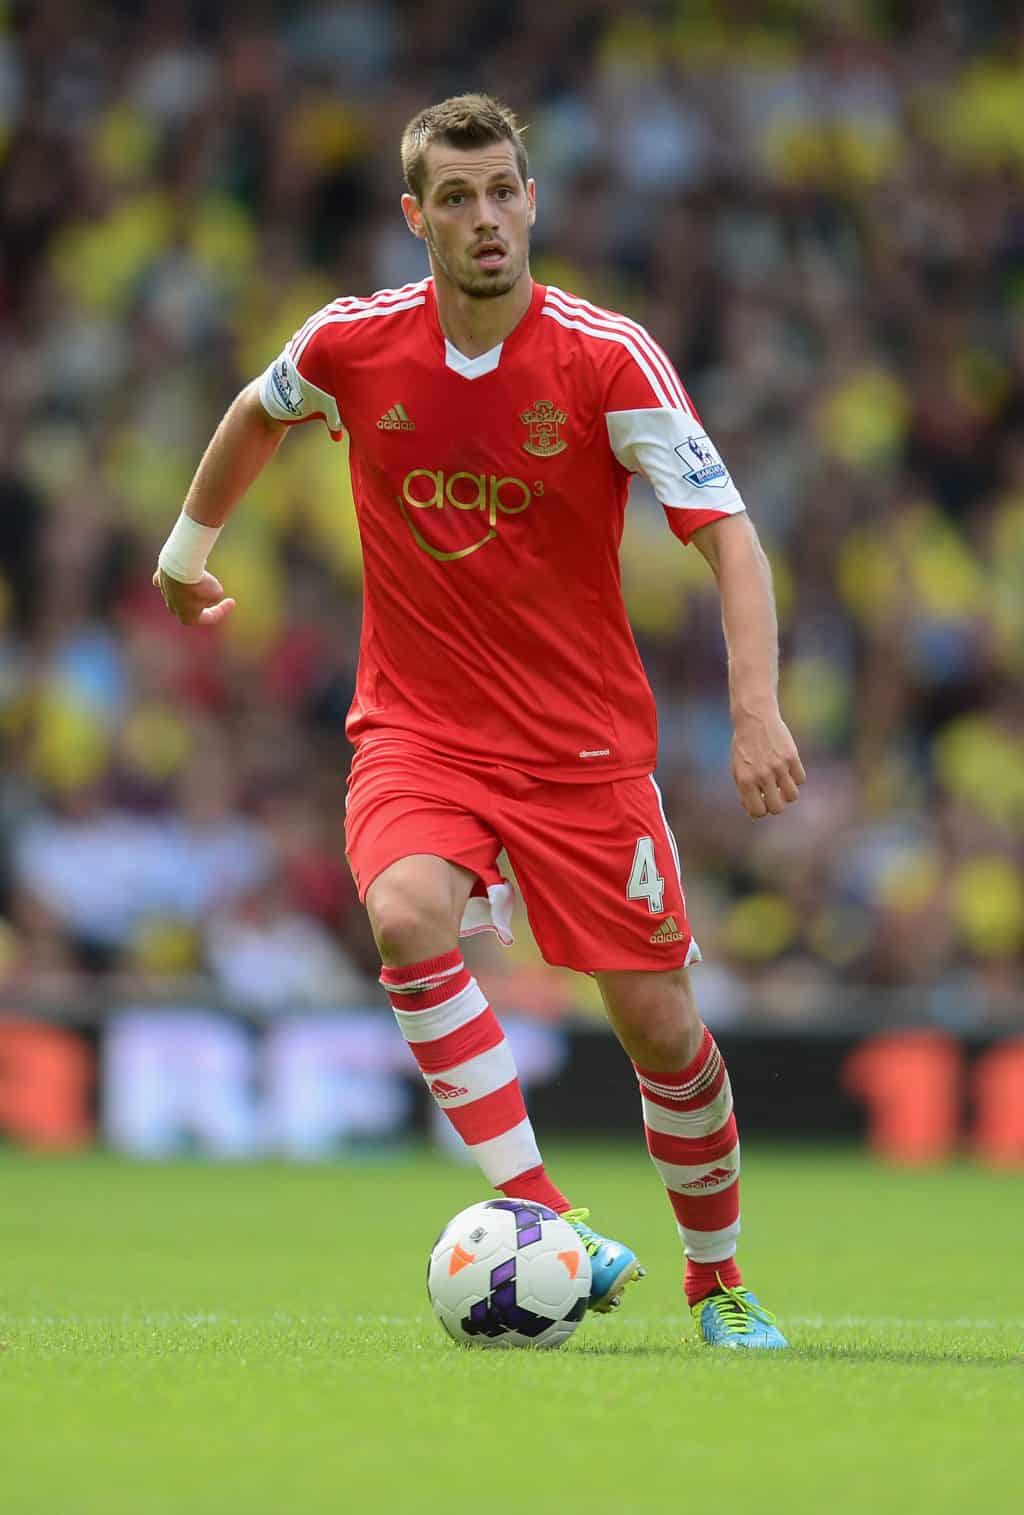 NORWICH, ENGLAND - AUGUST 31:  Morgan Schneiderlin of Southampton in action during the Barclays Premier League match between Norwich City and Southampton at Carrow Road on August 31, 2013 in Norwich, England.  (Photo by Jamie McDonald/Getty Images)